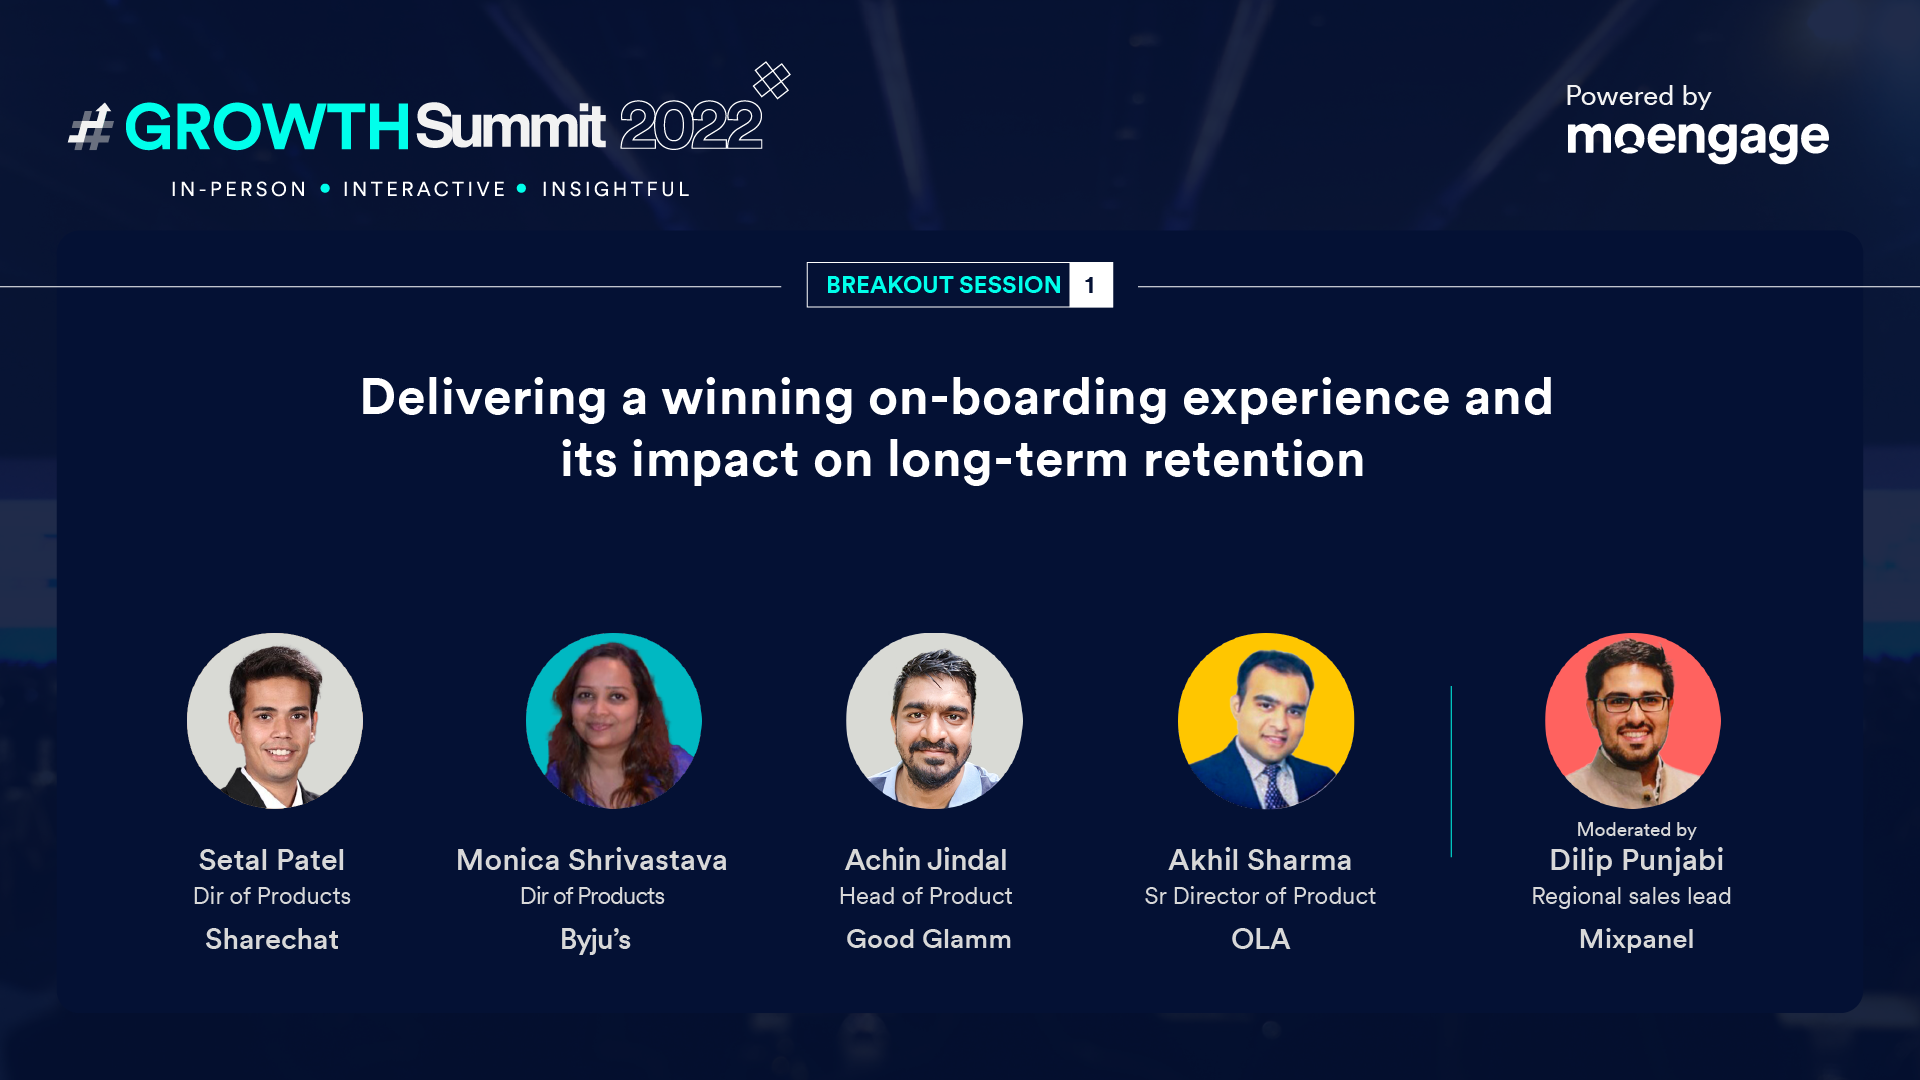 On-Boarding Experiences and Long-Term Retention